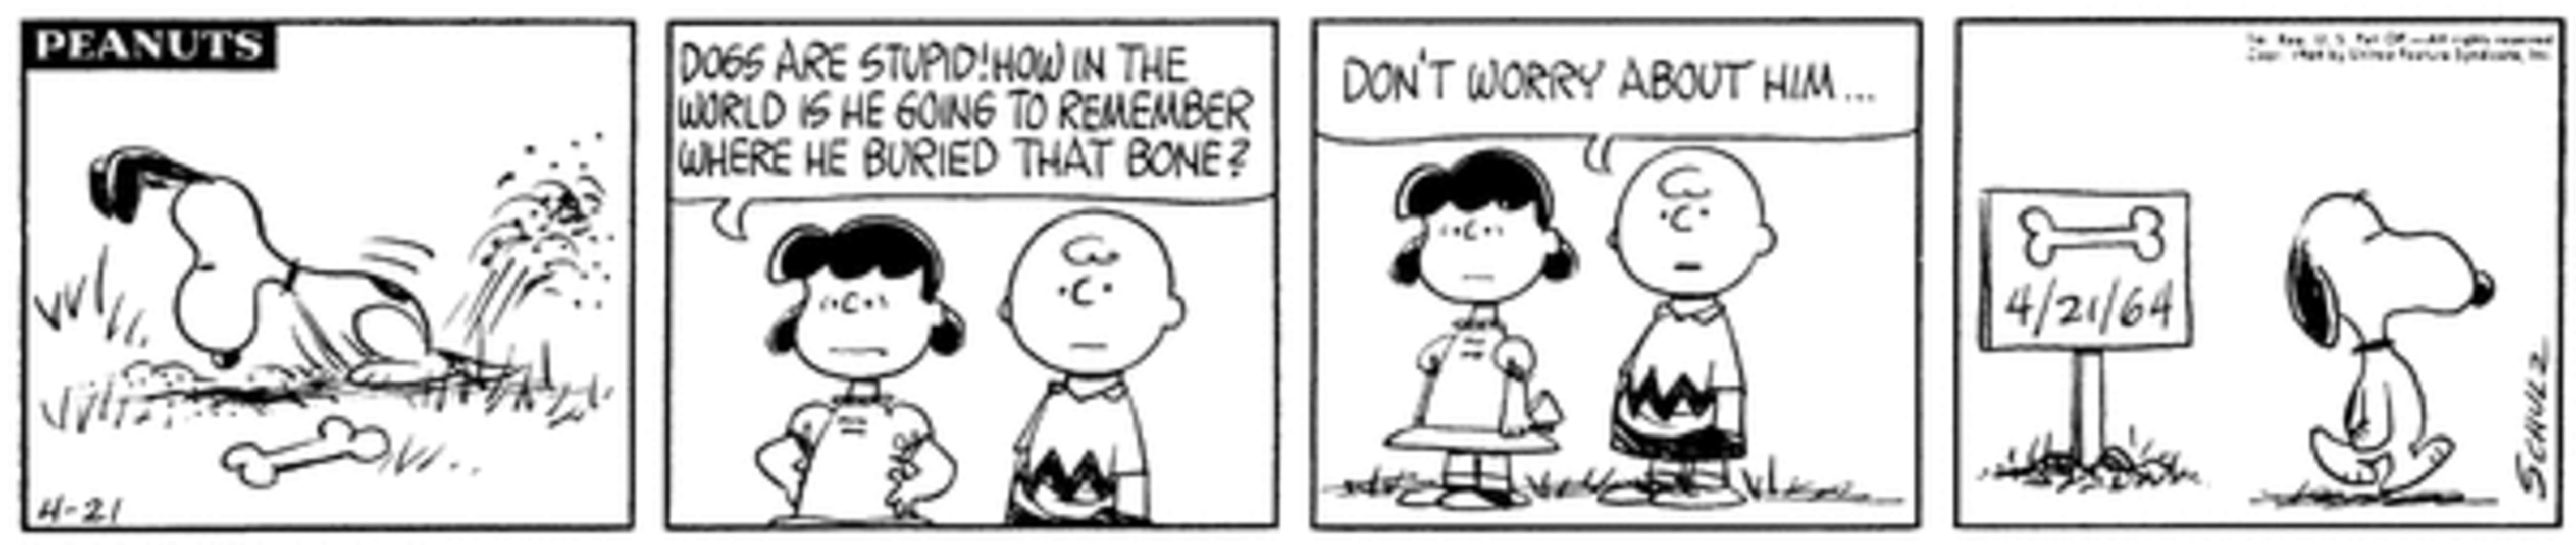 Snoopy, Lucy, and Charlie Brown in Peanuts.